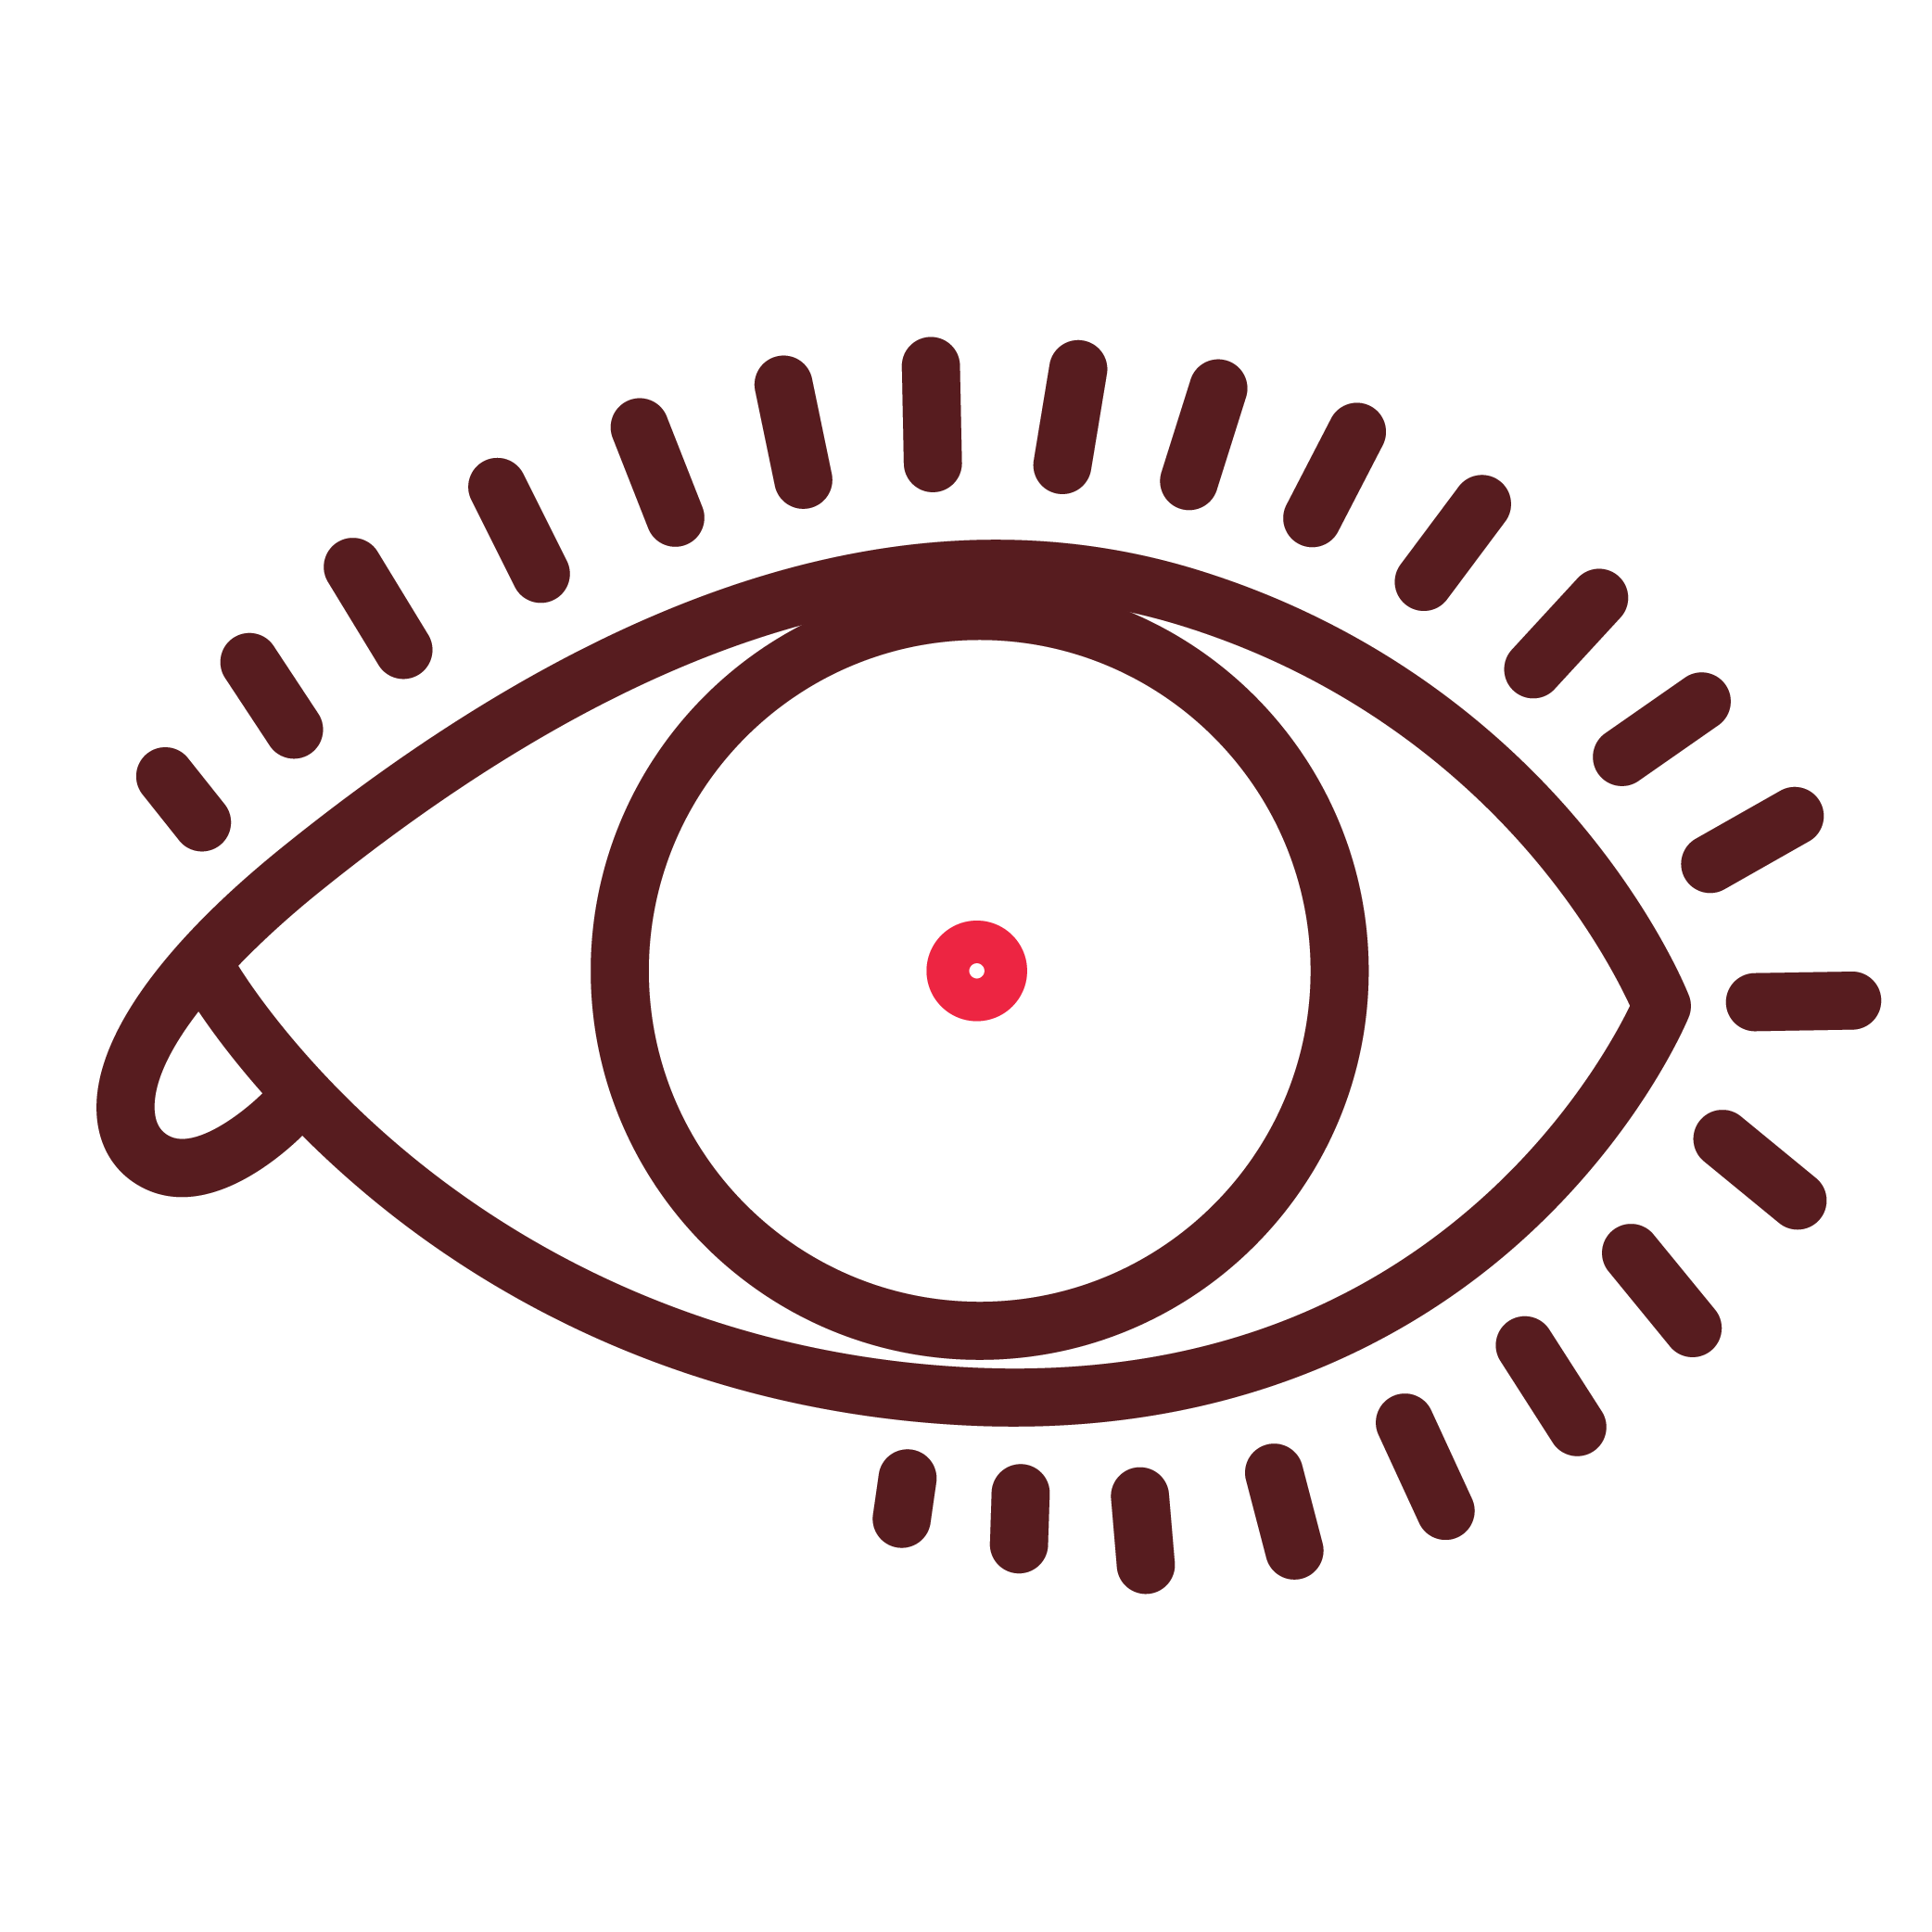 Image of an eye with dilated pupil